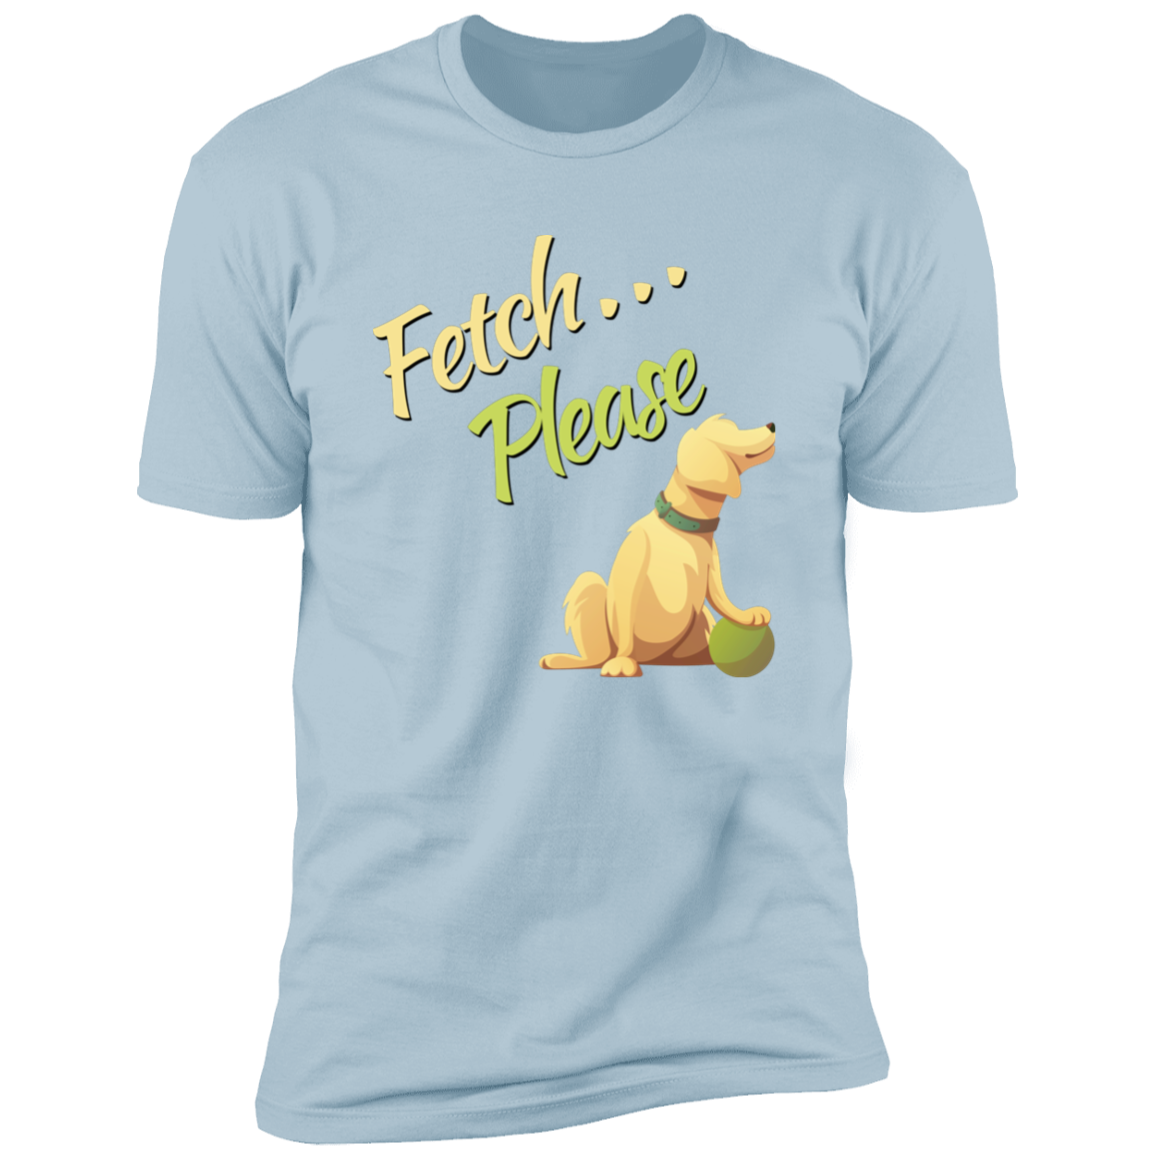 Fetch Please funny dog t-shirt, funny dog shirt for humans, in light blue